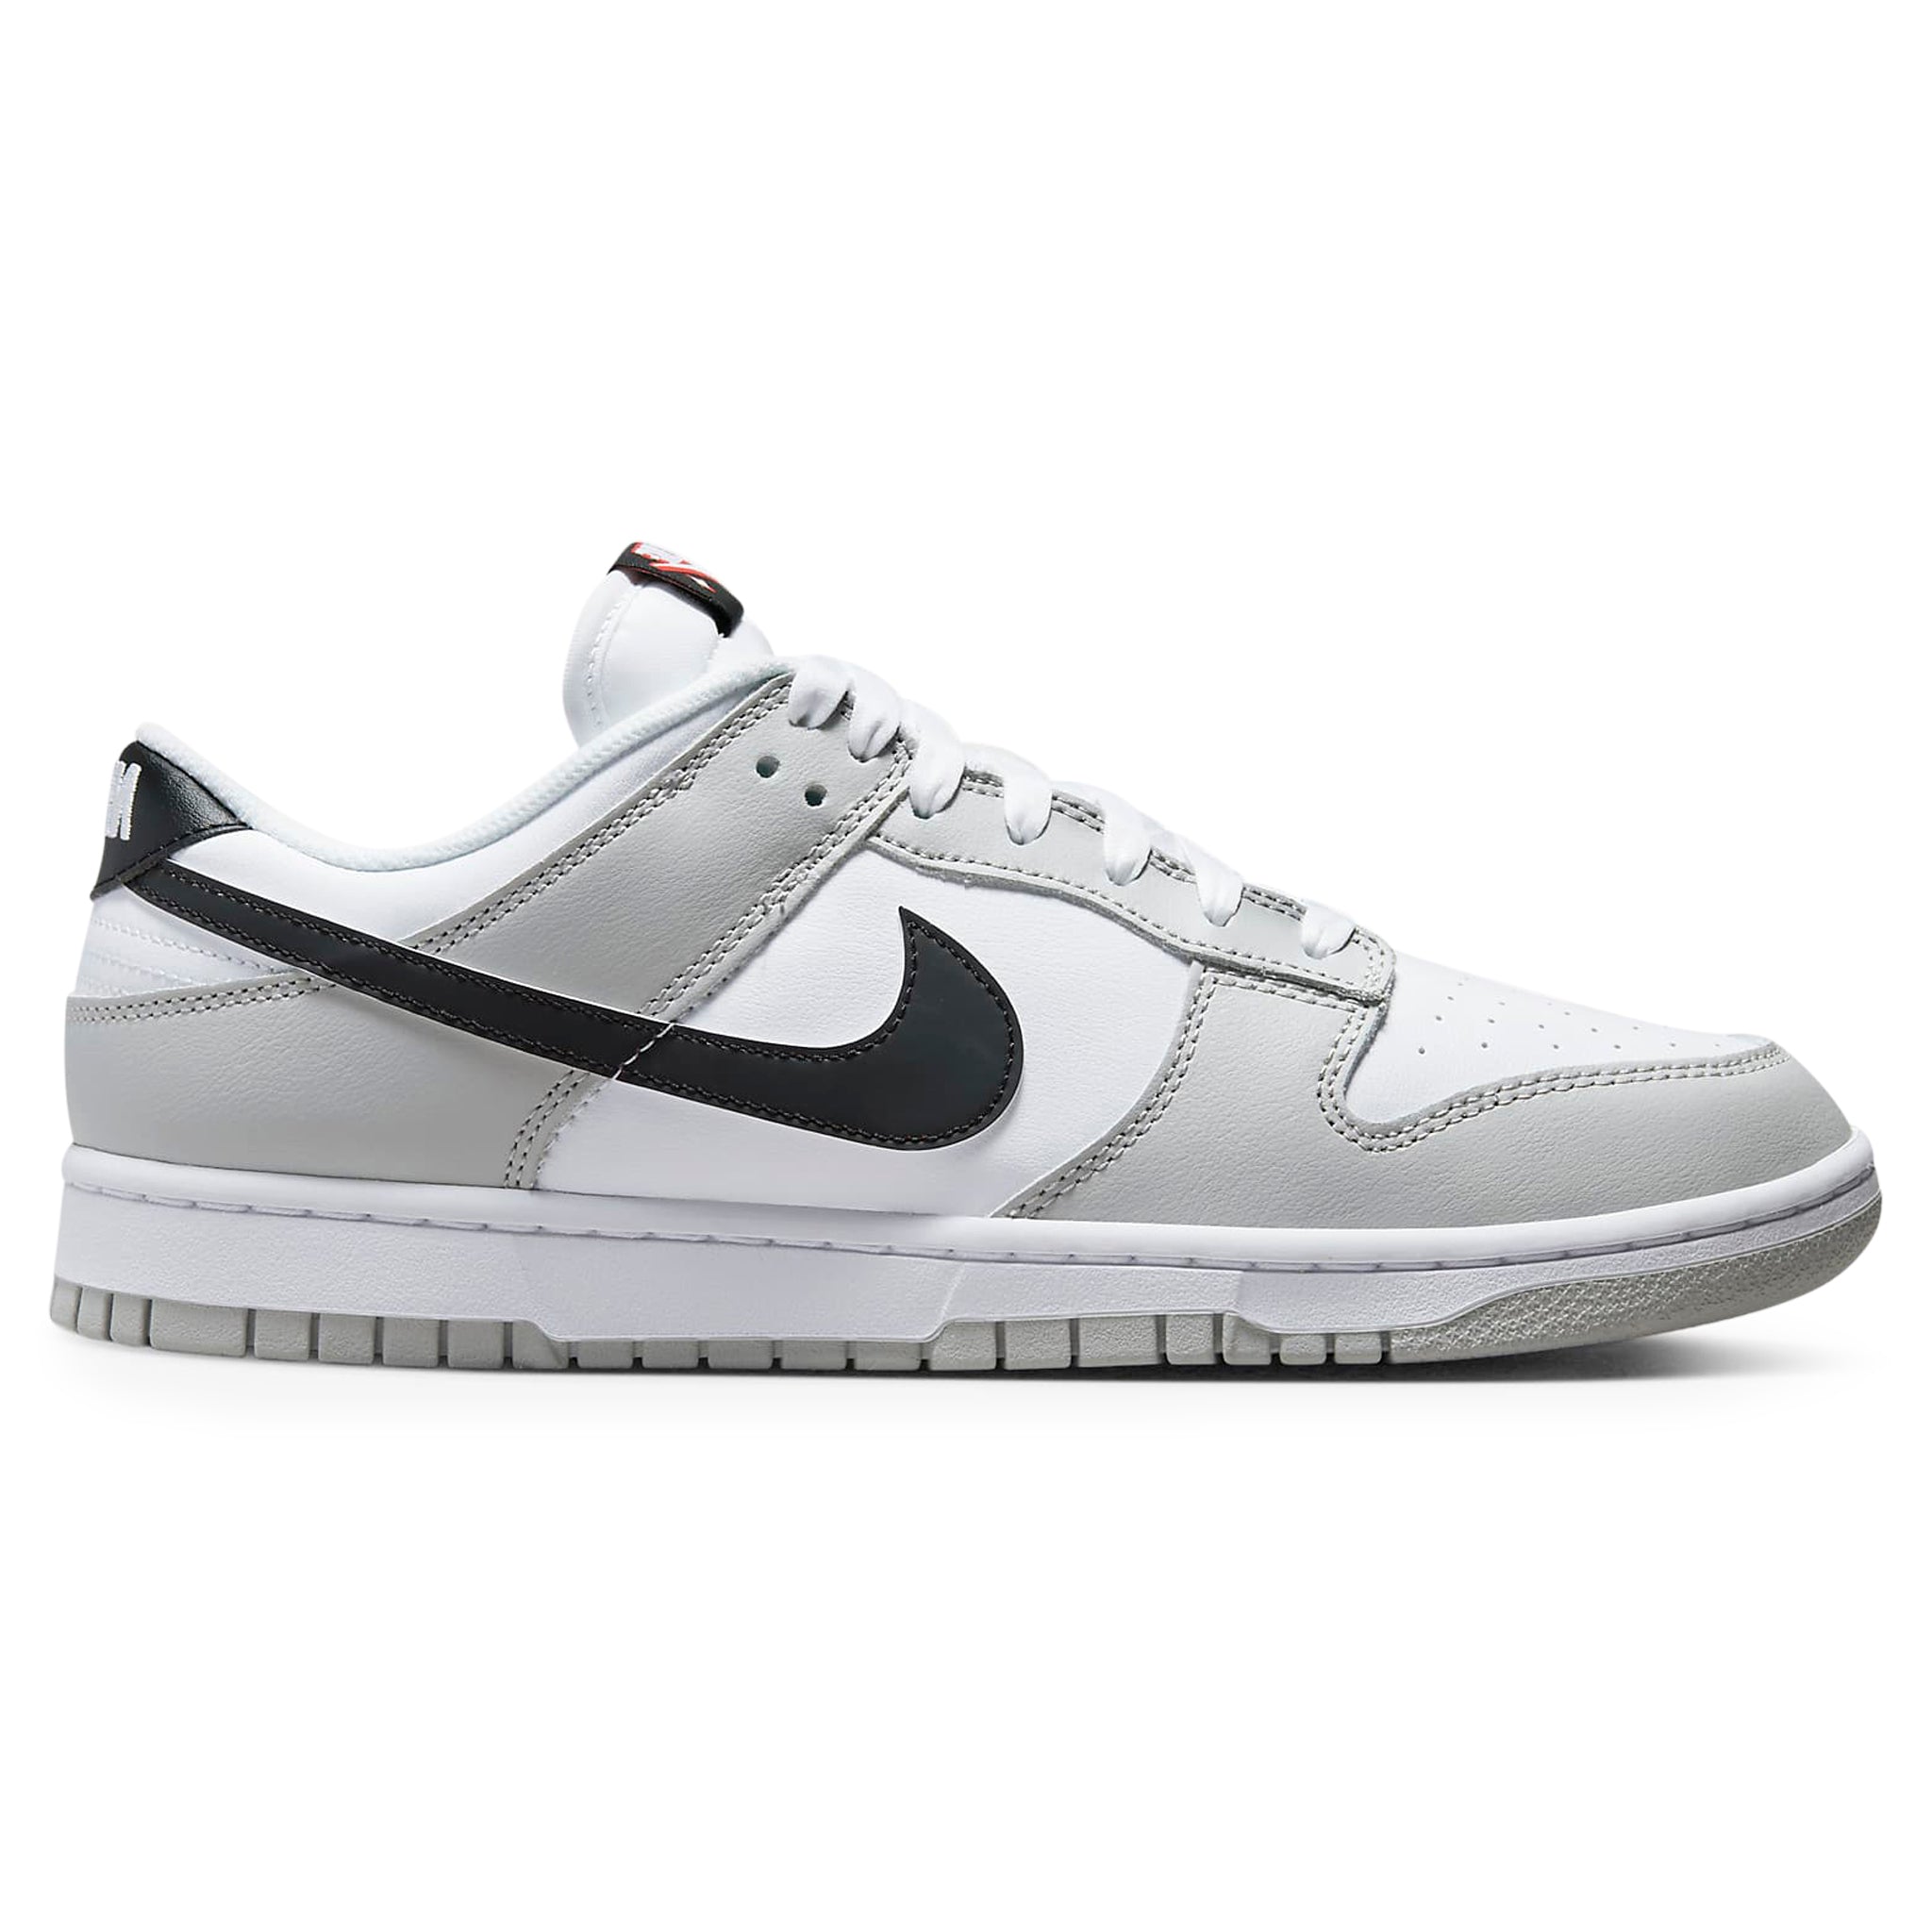 Side view of Nike Dunk Low SE Jackpot DR9654-001